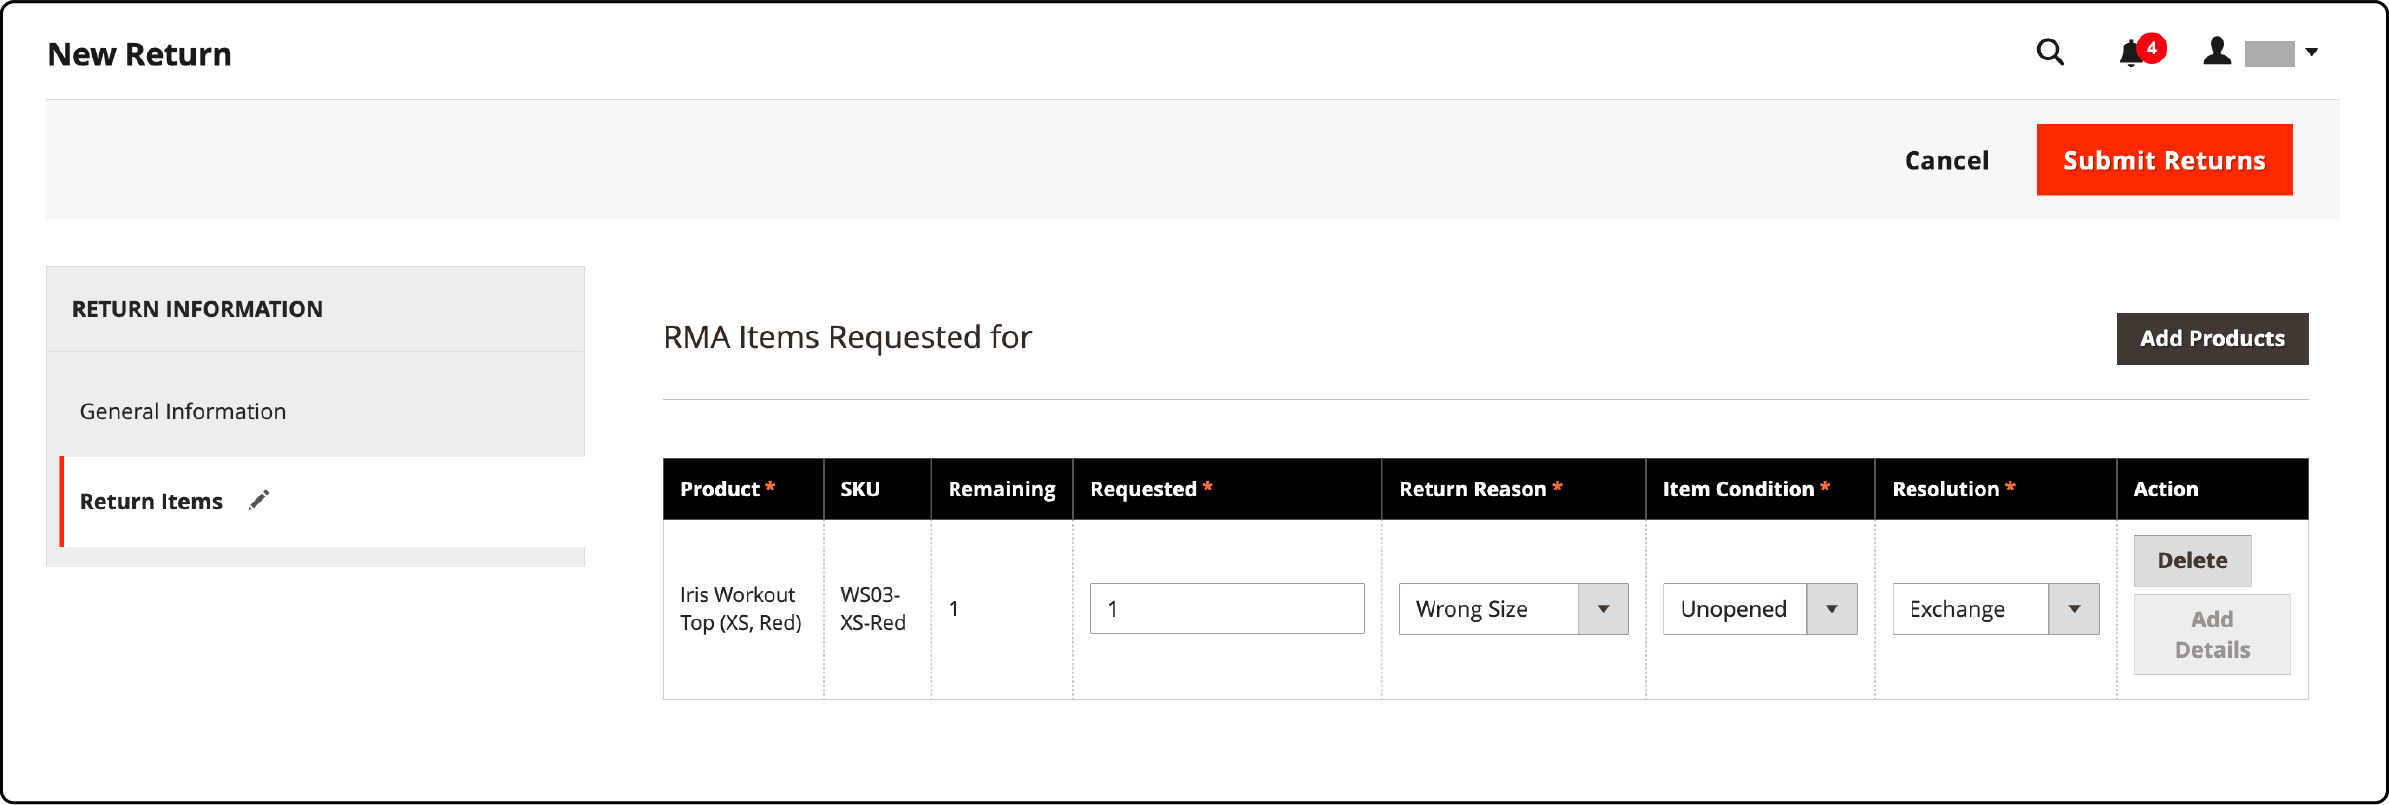 Step-by-step guide on creating a return request in Magento Admin